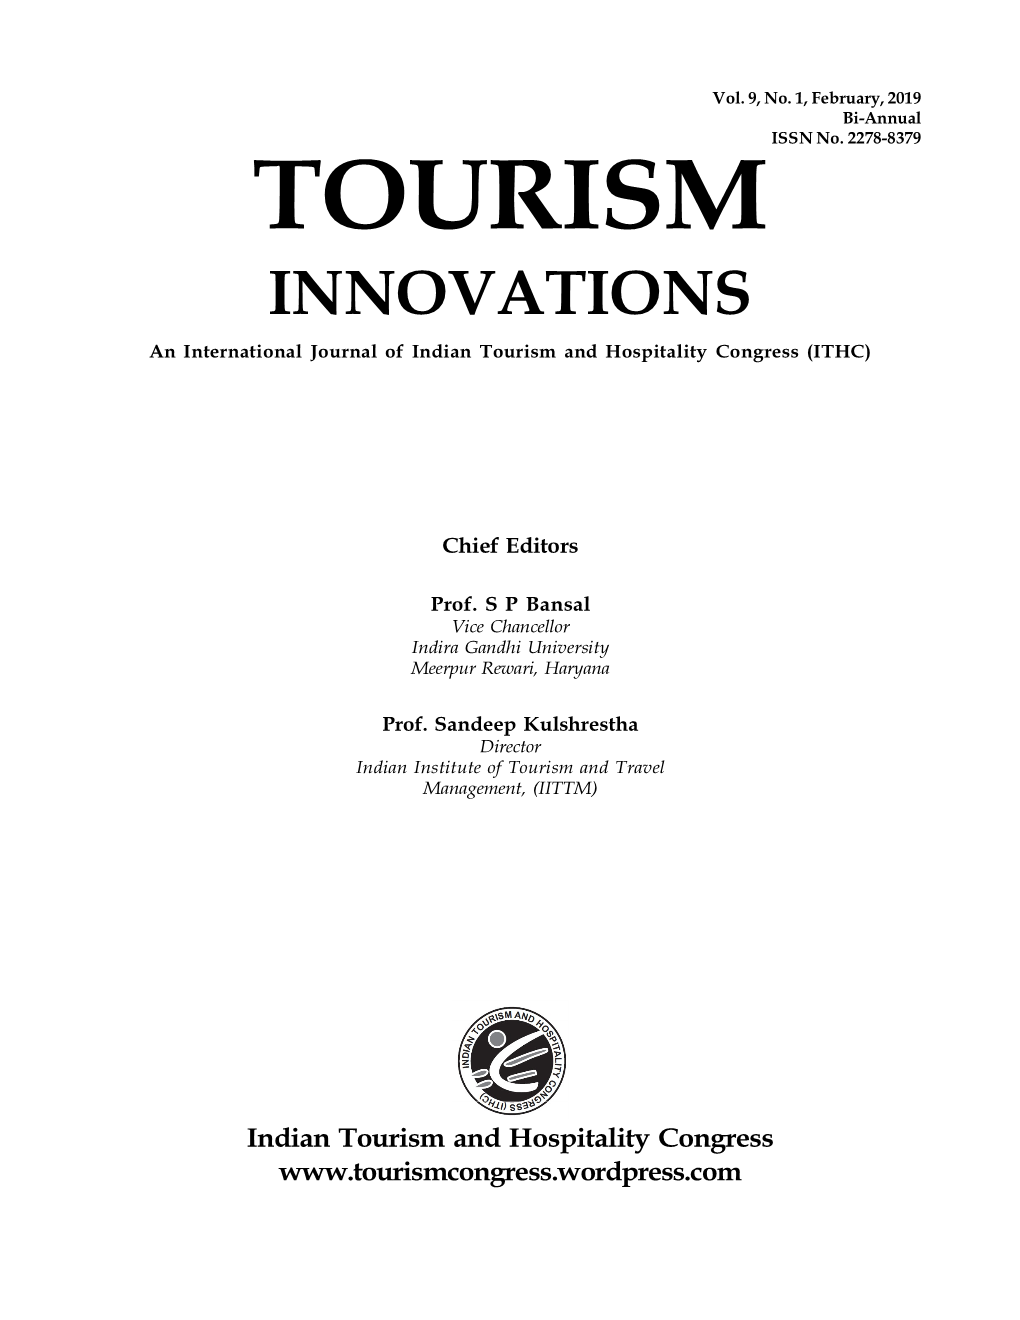 TOURISM INNOVATIONS an International Journal of Indian Tourism and Hospitality Congress (ITHC)